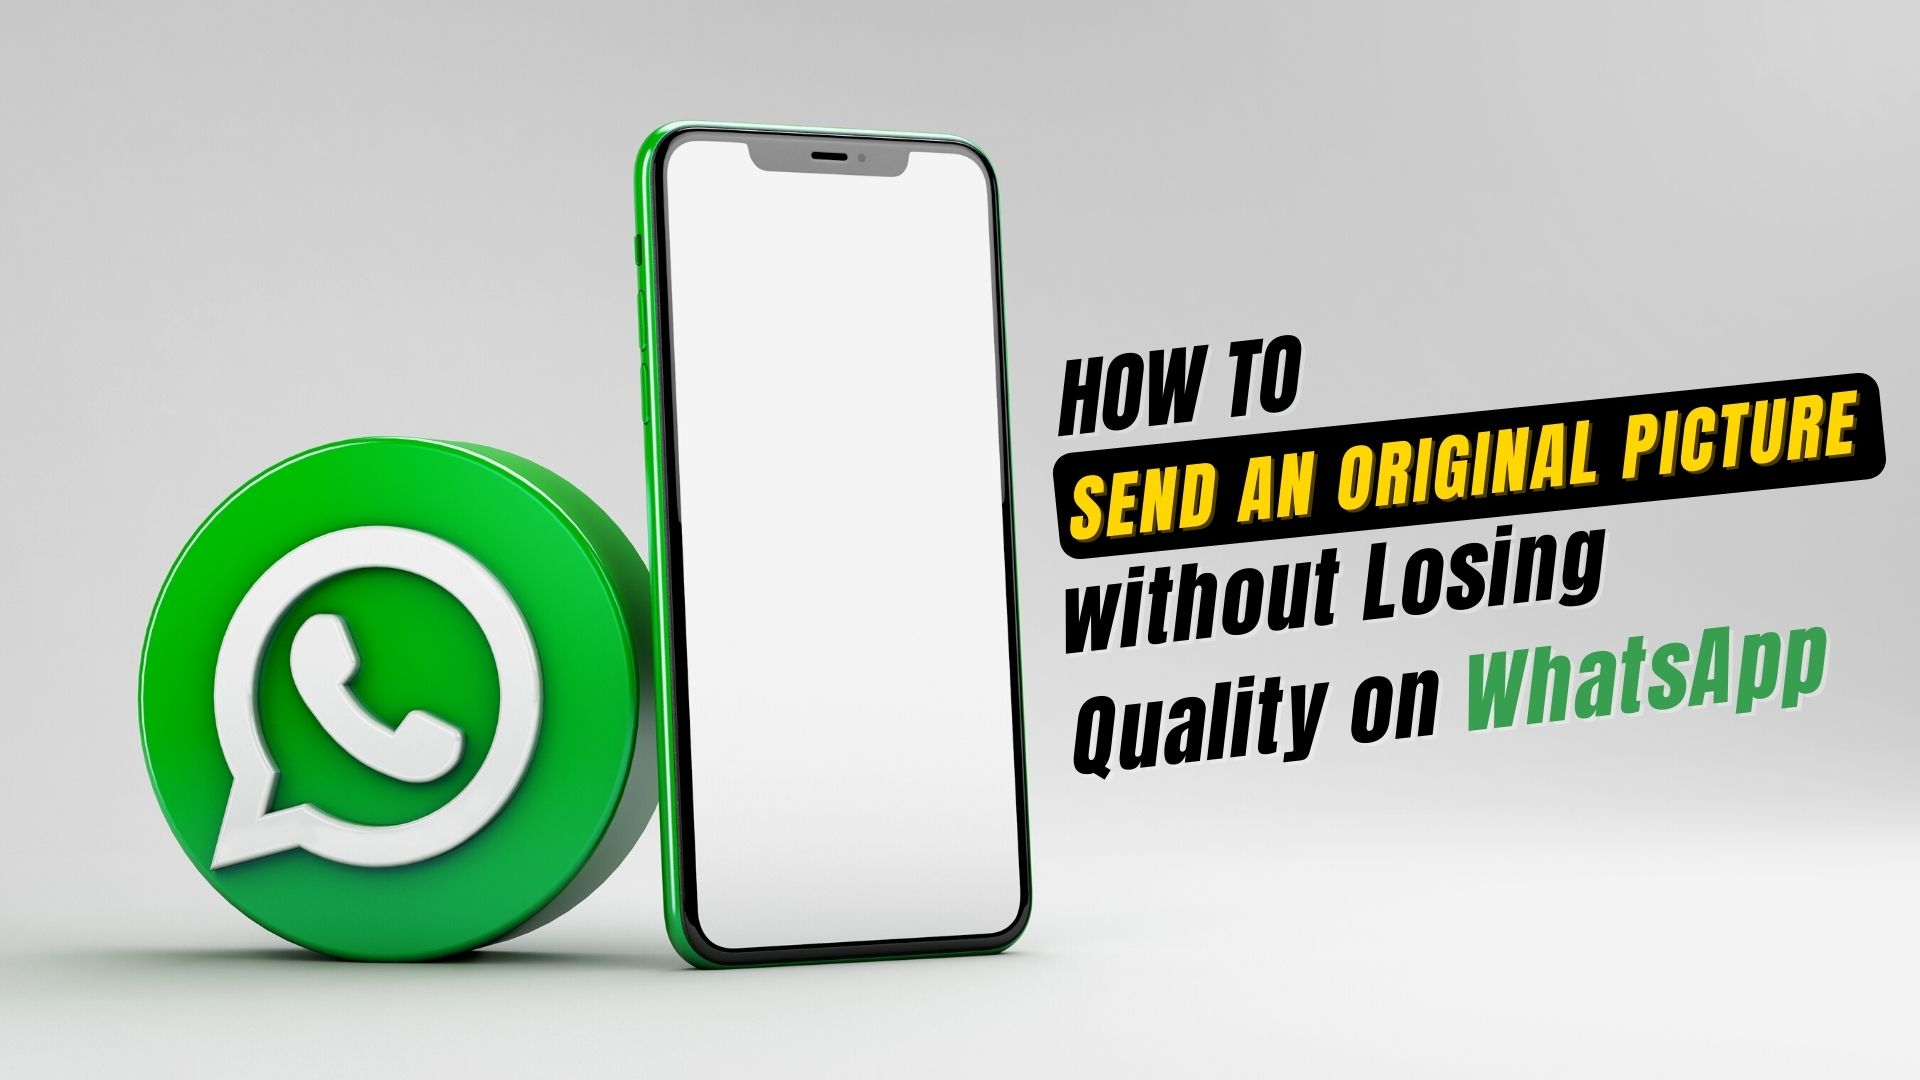 How to Send an Original Picture without Losing Quality on WhatsApp